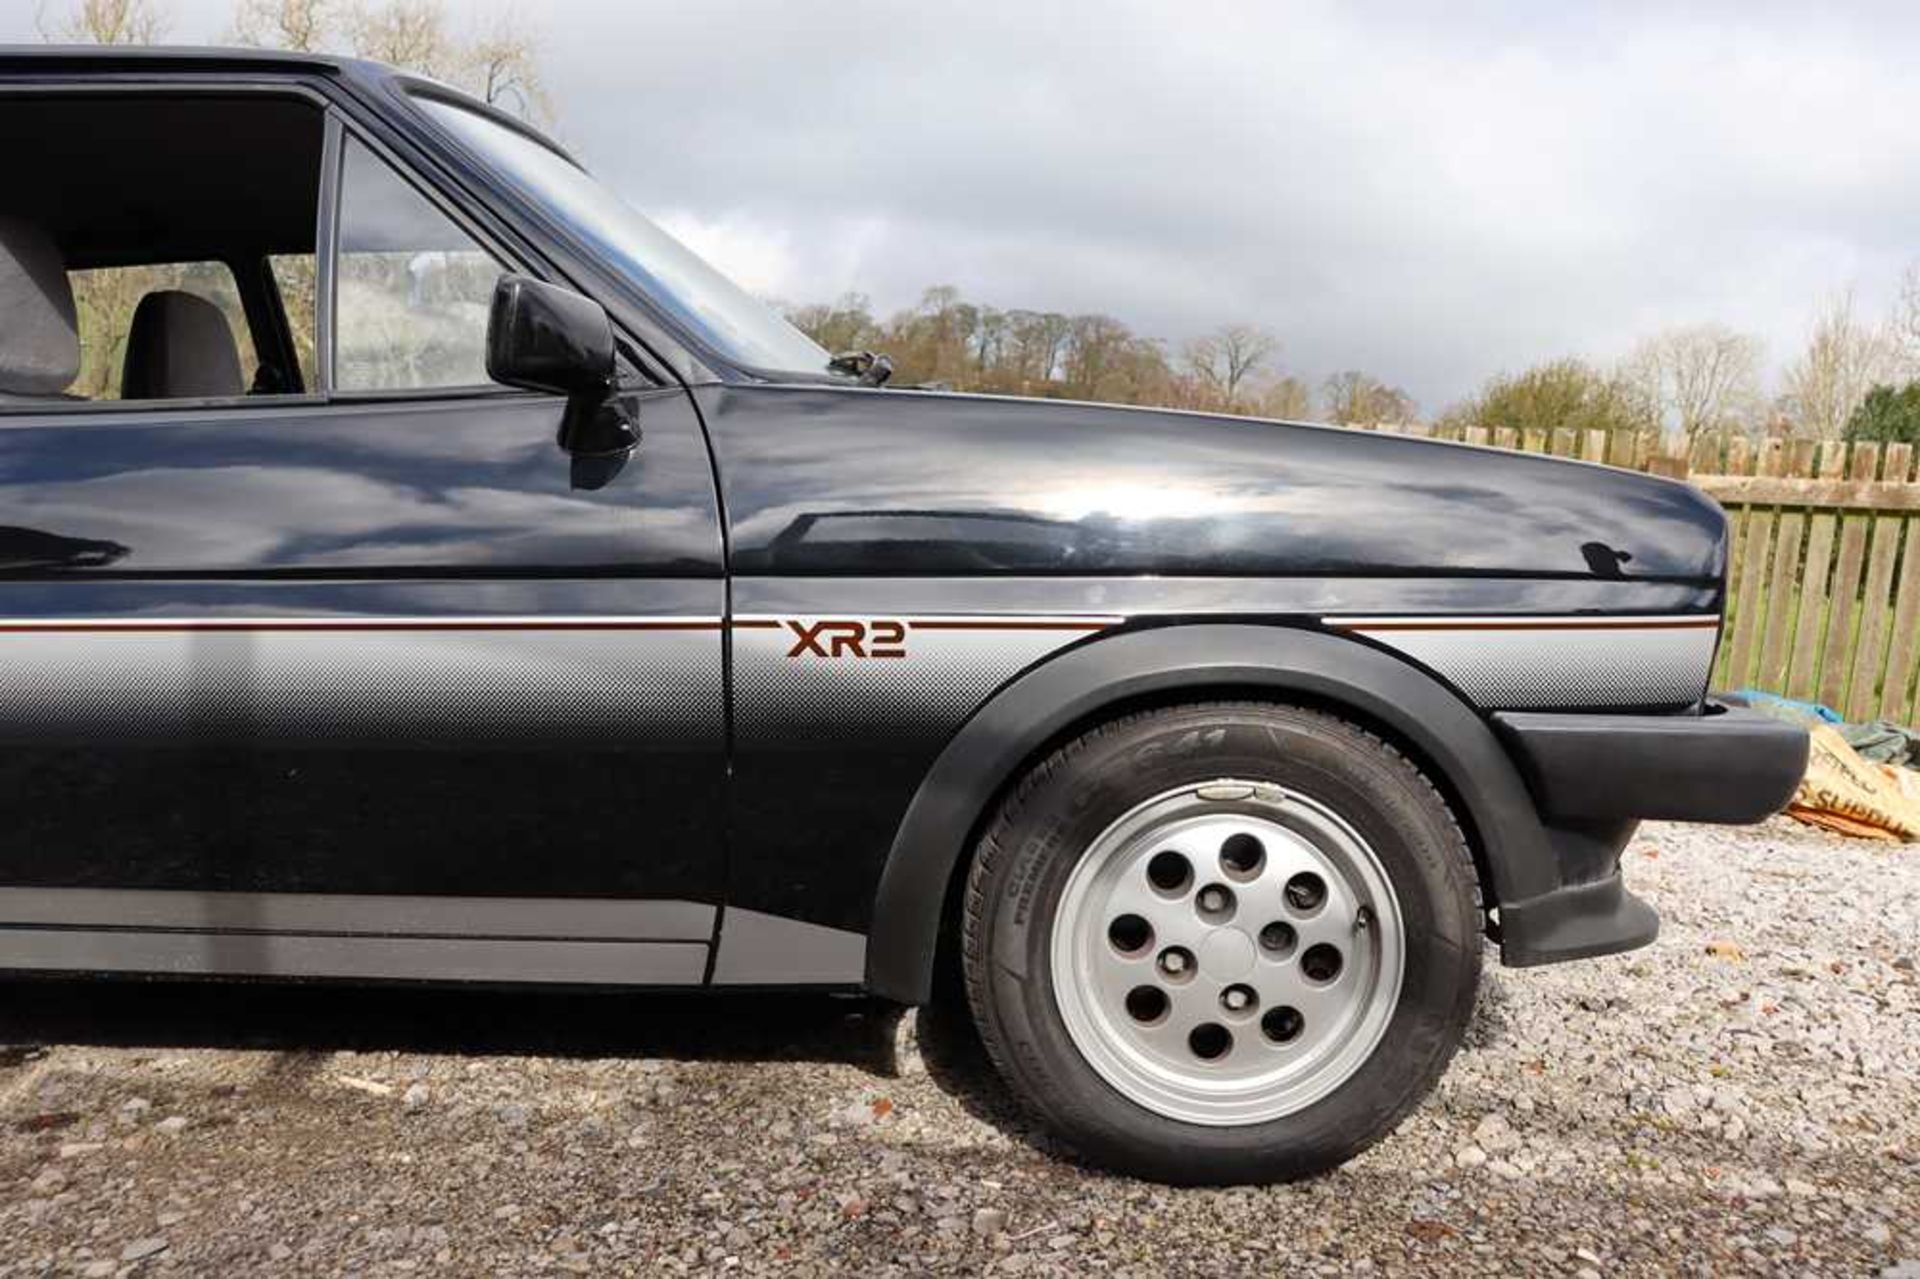 1983 Ford Fiesta XR2 - Image 35 of 56